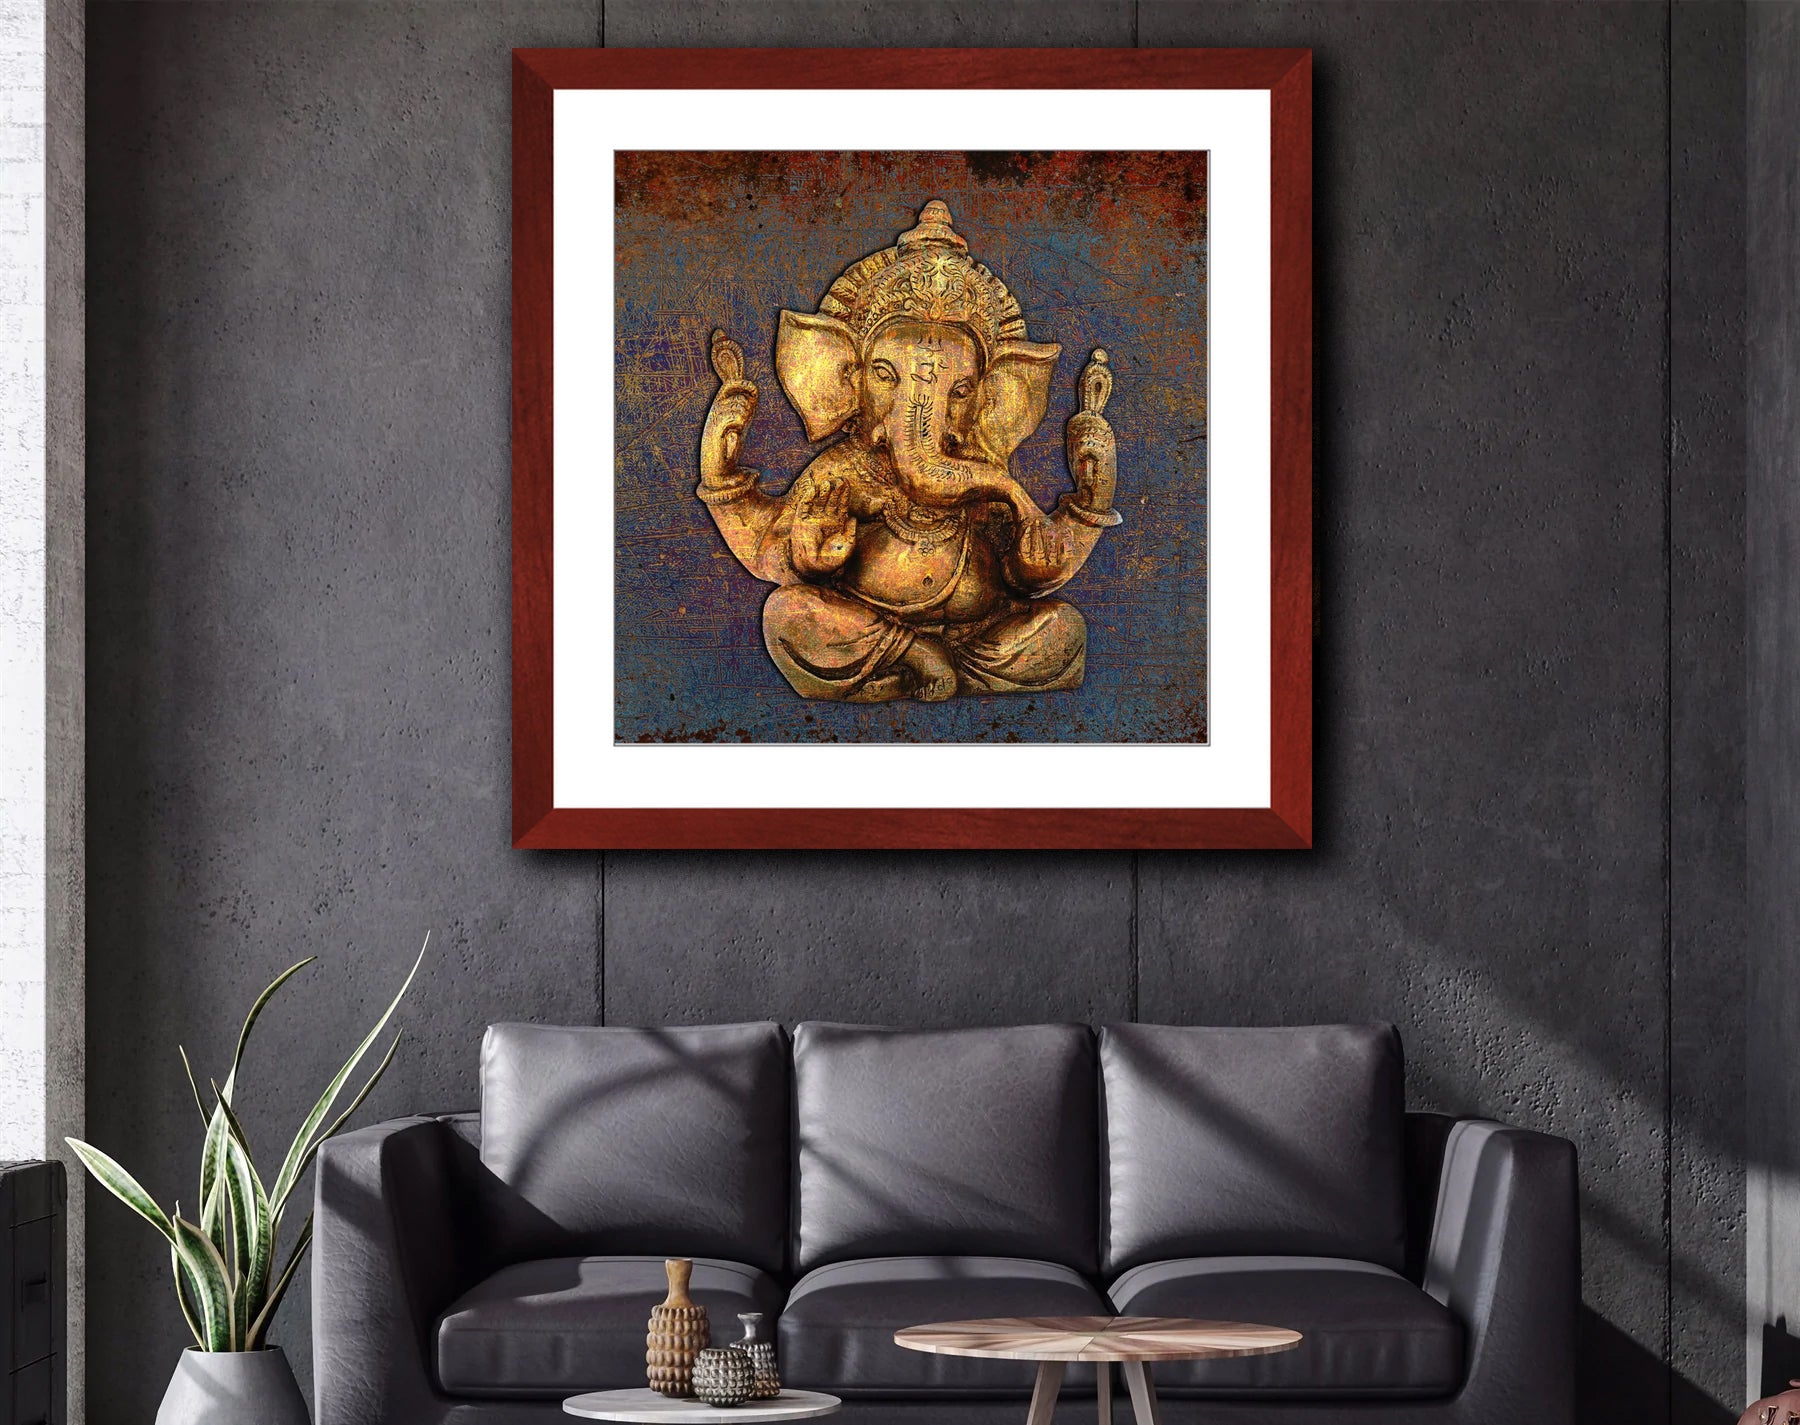 Ganesha on Distressed Purple and Orange Background Print in Cherry Color Wood Frame hung